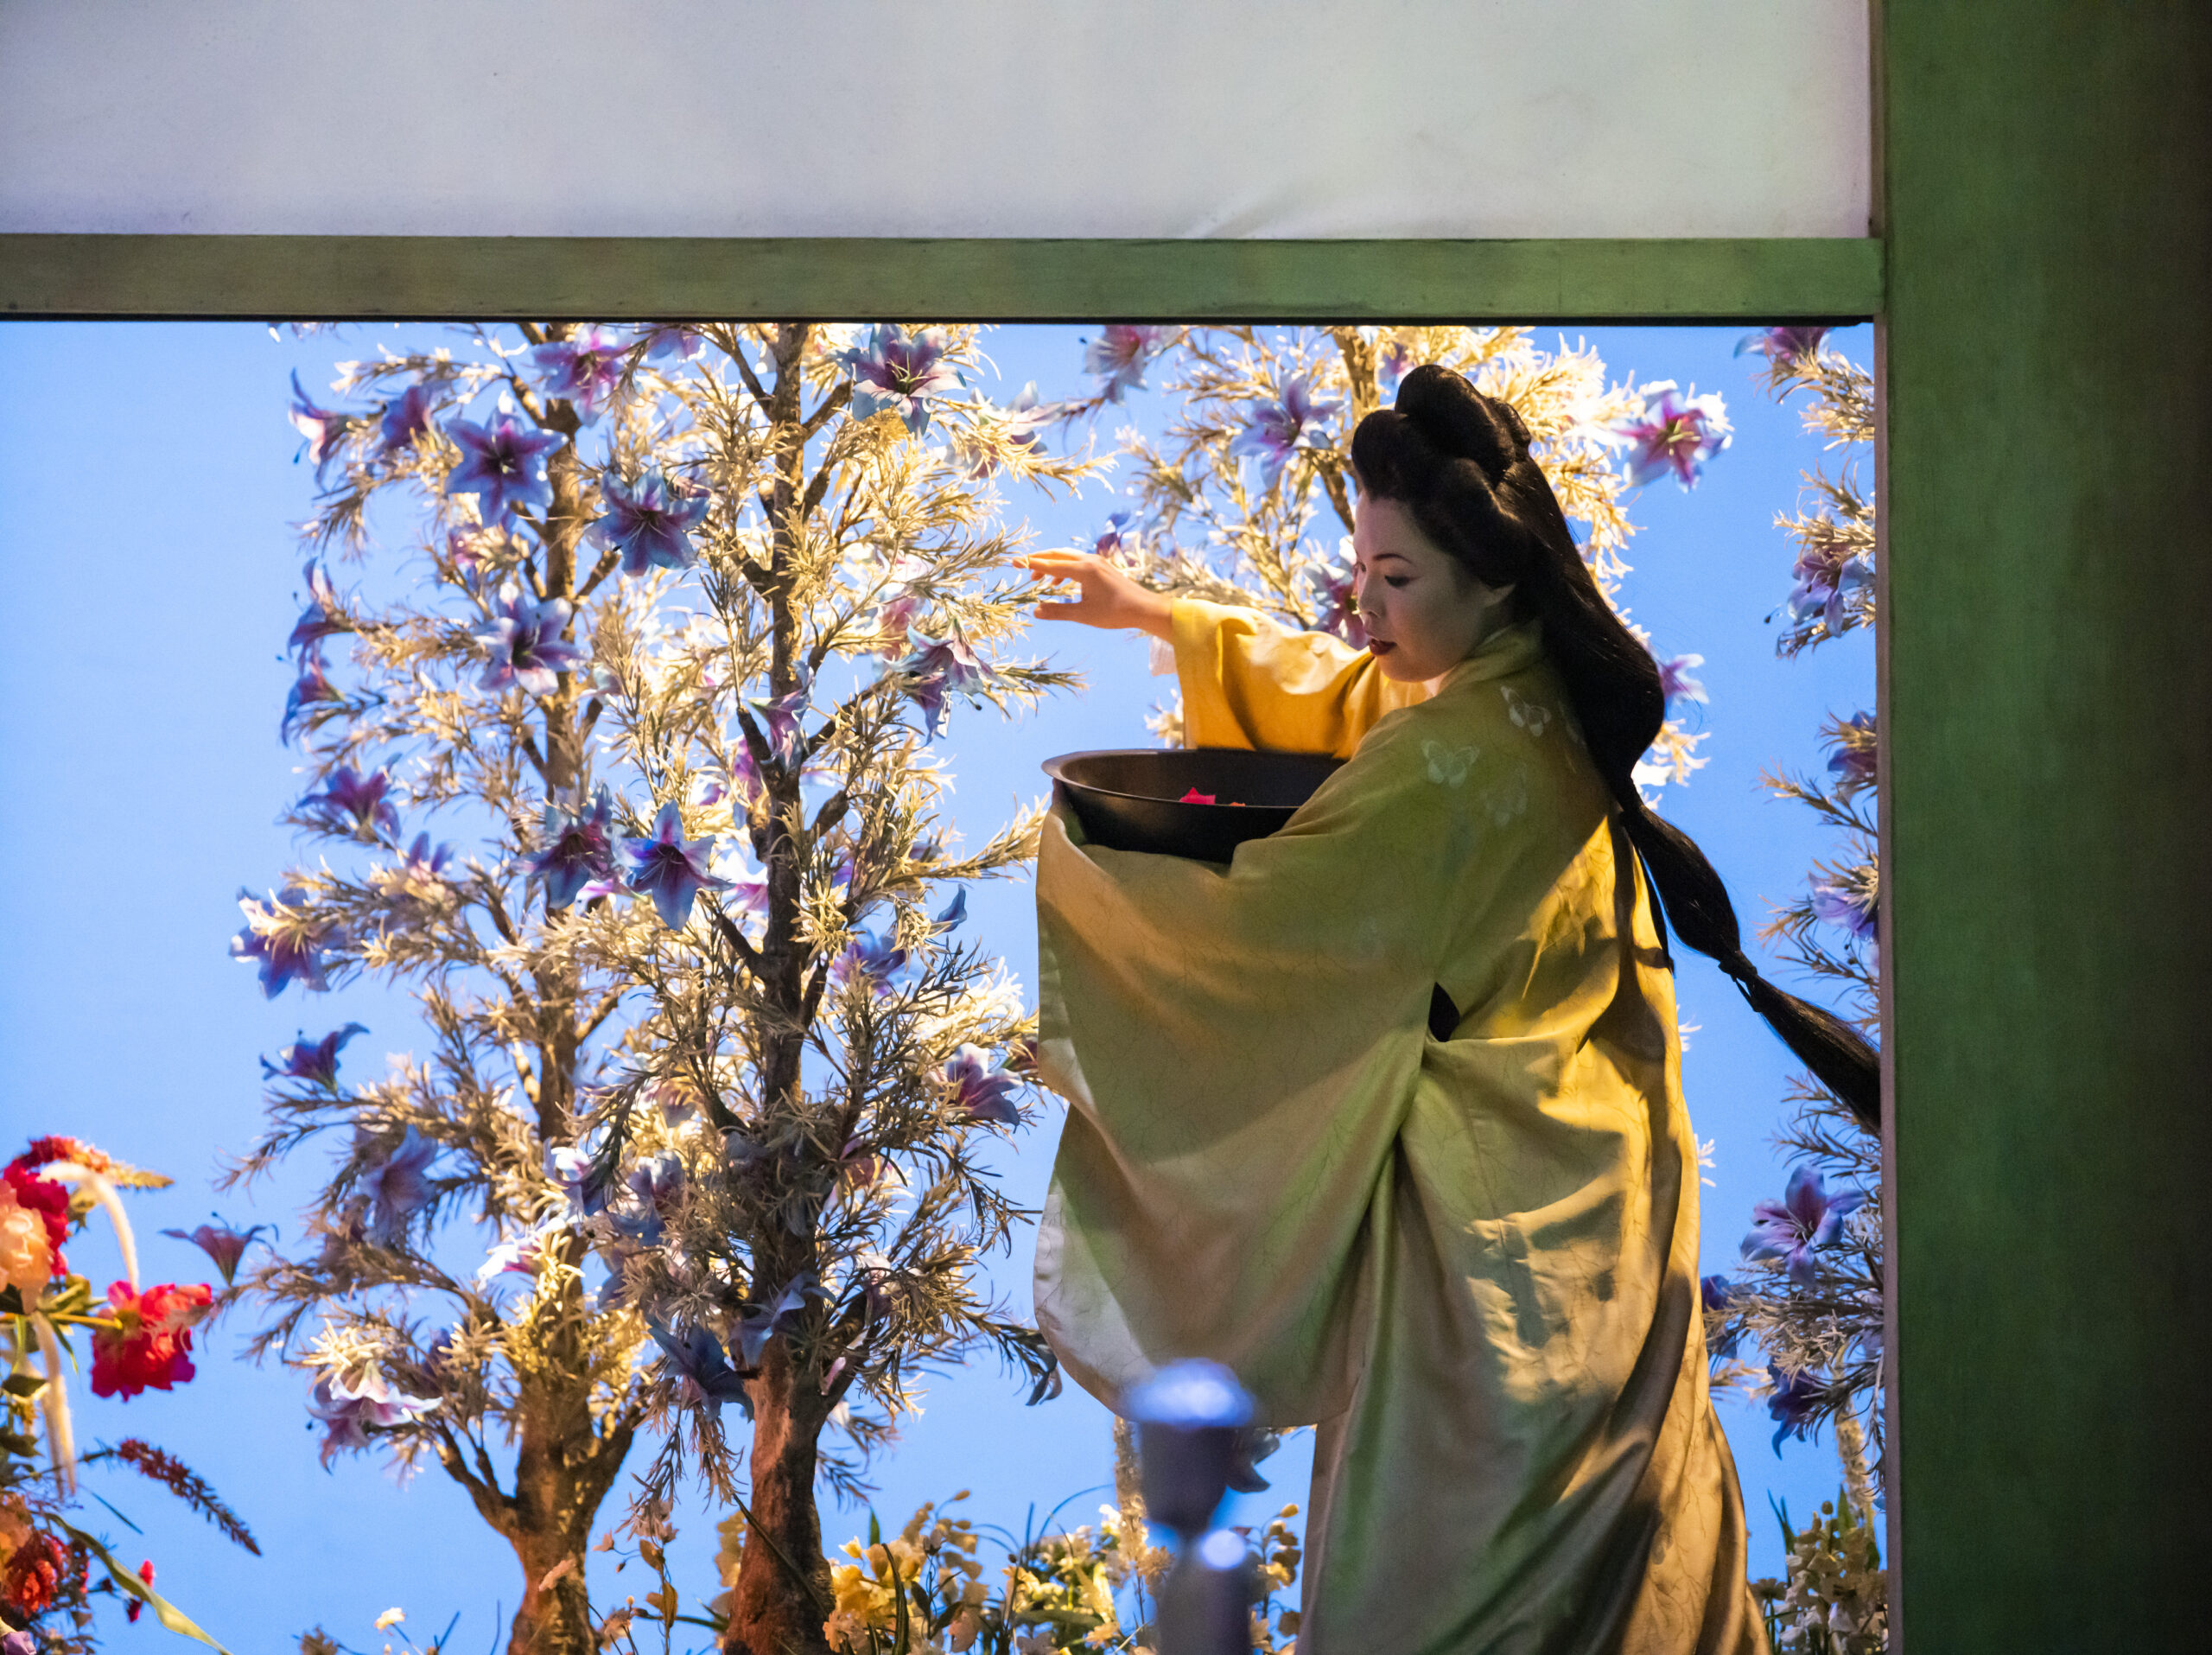 A scene from Madama Butterfly by Puccini